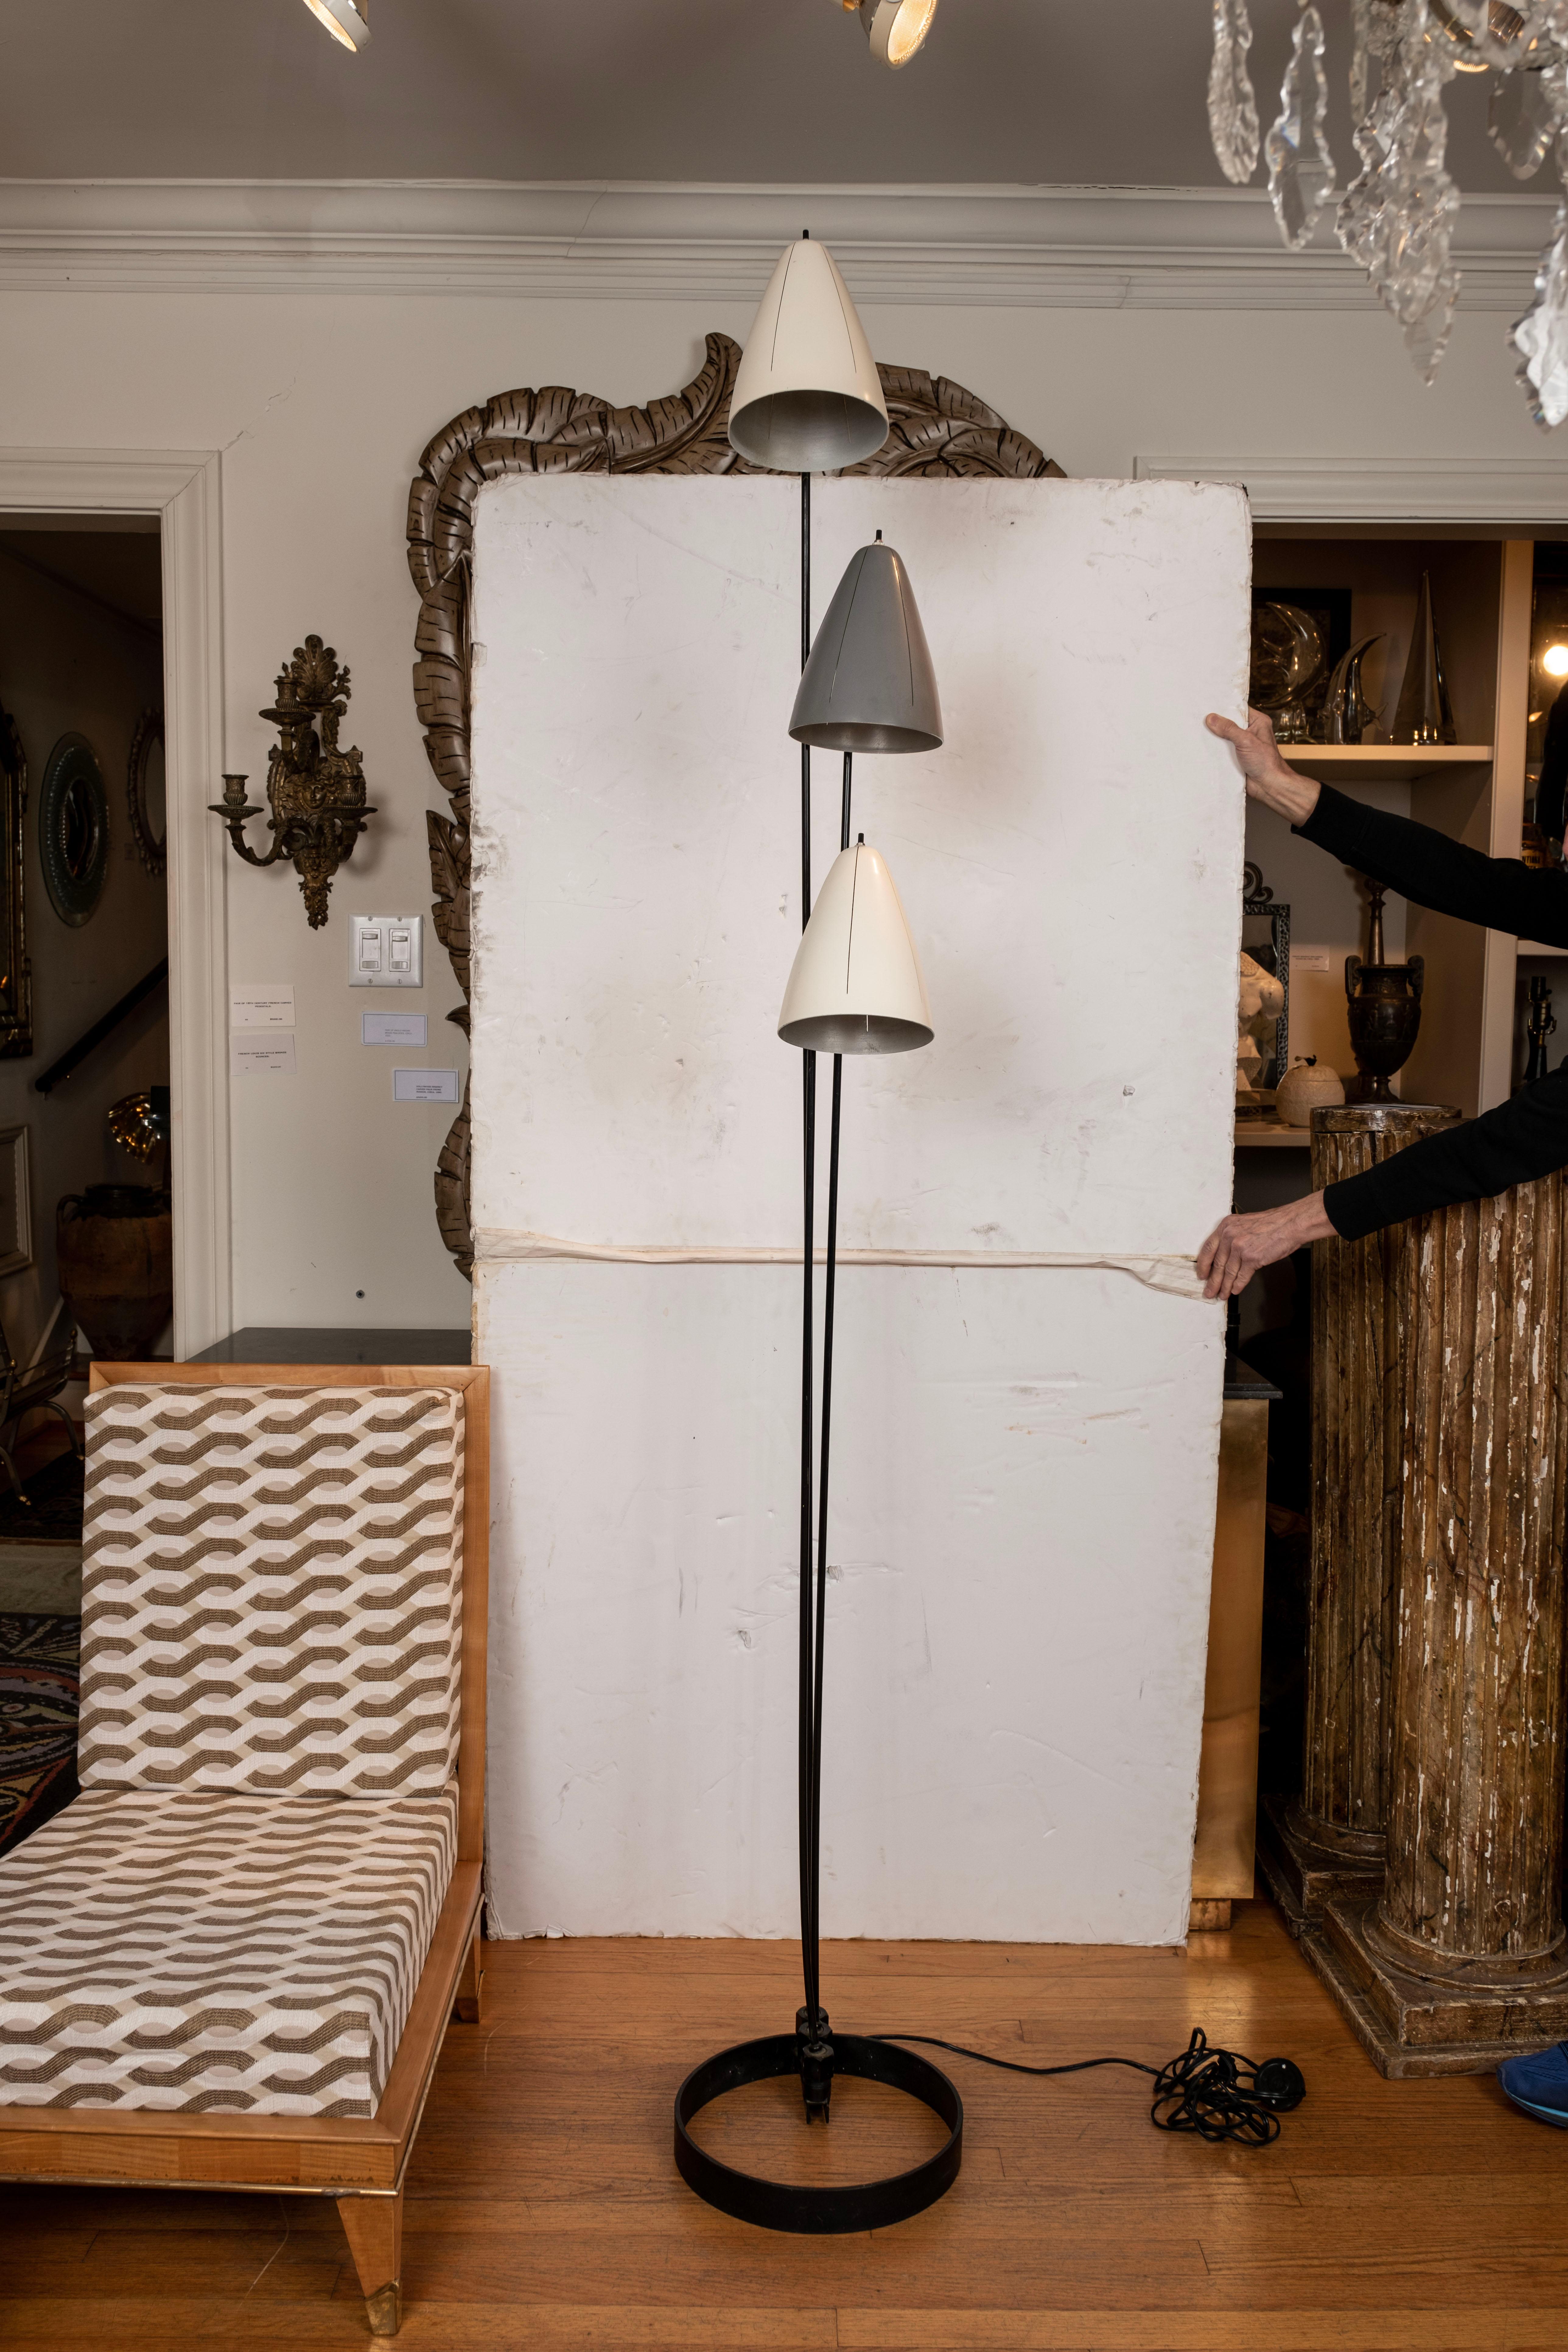  articulating floor lamp By Ben Seibel.
This rare mid century Ben Seibel designed floor lamp is constructed of iron with three cone shaped articulating lights.
Our Mid-Century Modern floor lamp is in original unrestored condition with light expected